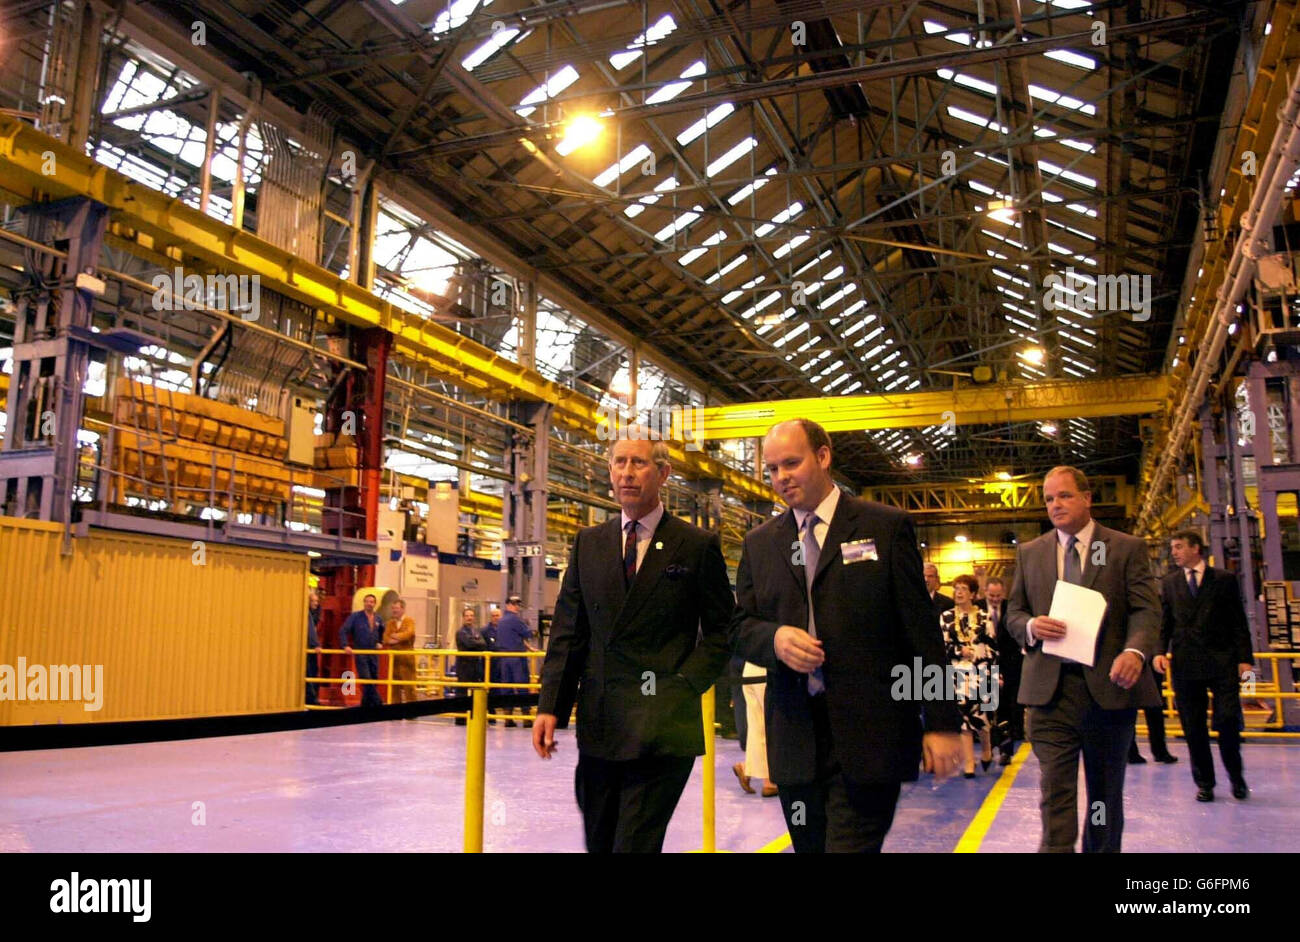 The Prince of Wales is guided through the factory at the Weir Pumps in Cathcart, Glasgow,where he visited workers at Scotland's largest engineering firm. Charles, known as the Duke of Rothesay in Scotland, dropped in on staff and management at the Weir Group in Glasgow at the start of a day of visits around the country. Weir employs around 8,000 people worldwide making specialist pumping equipment from the defence and nuclear industries to the power generation and water treatment sectors. Stock Photo